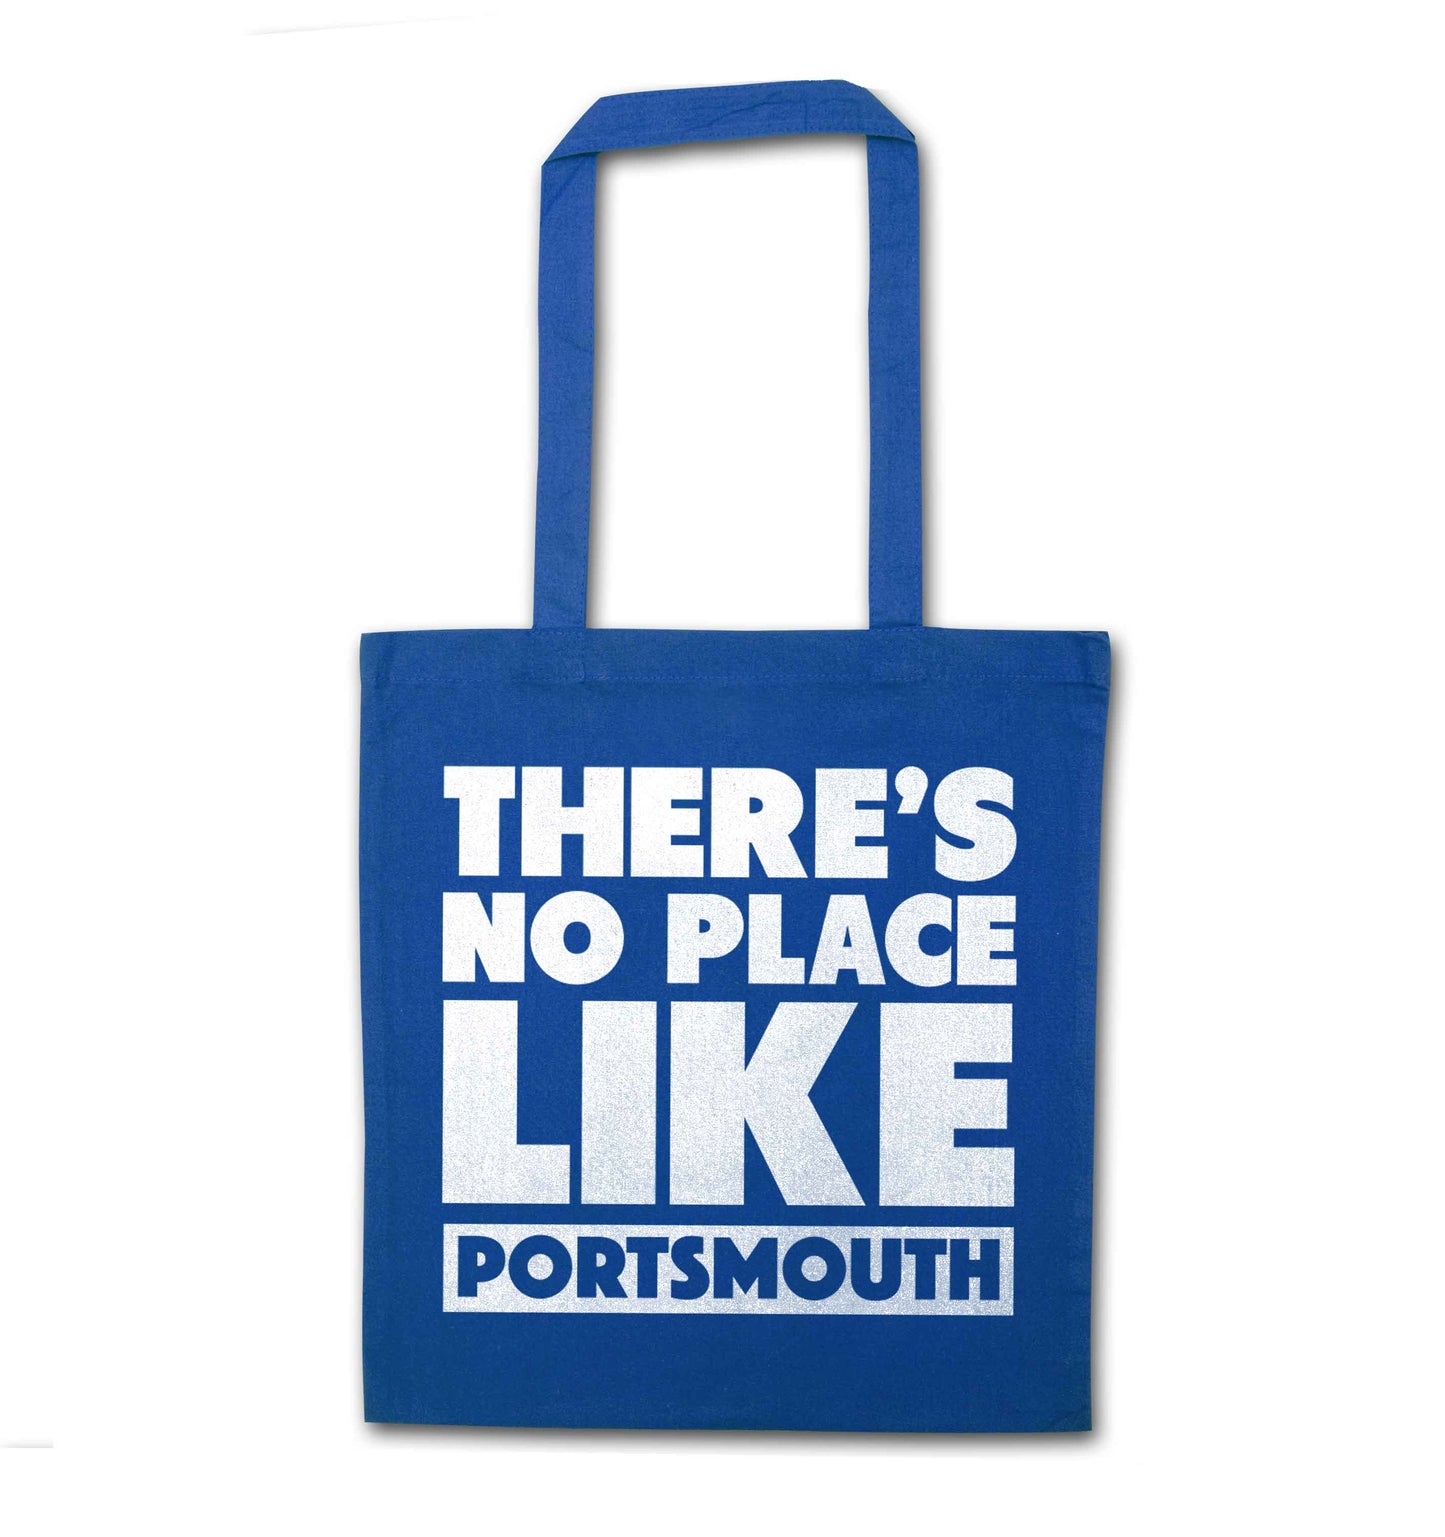 There's no place like Porstmouth blue tote bag